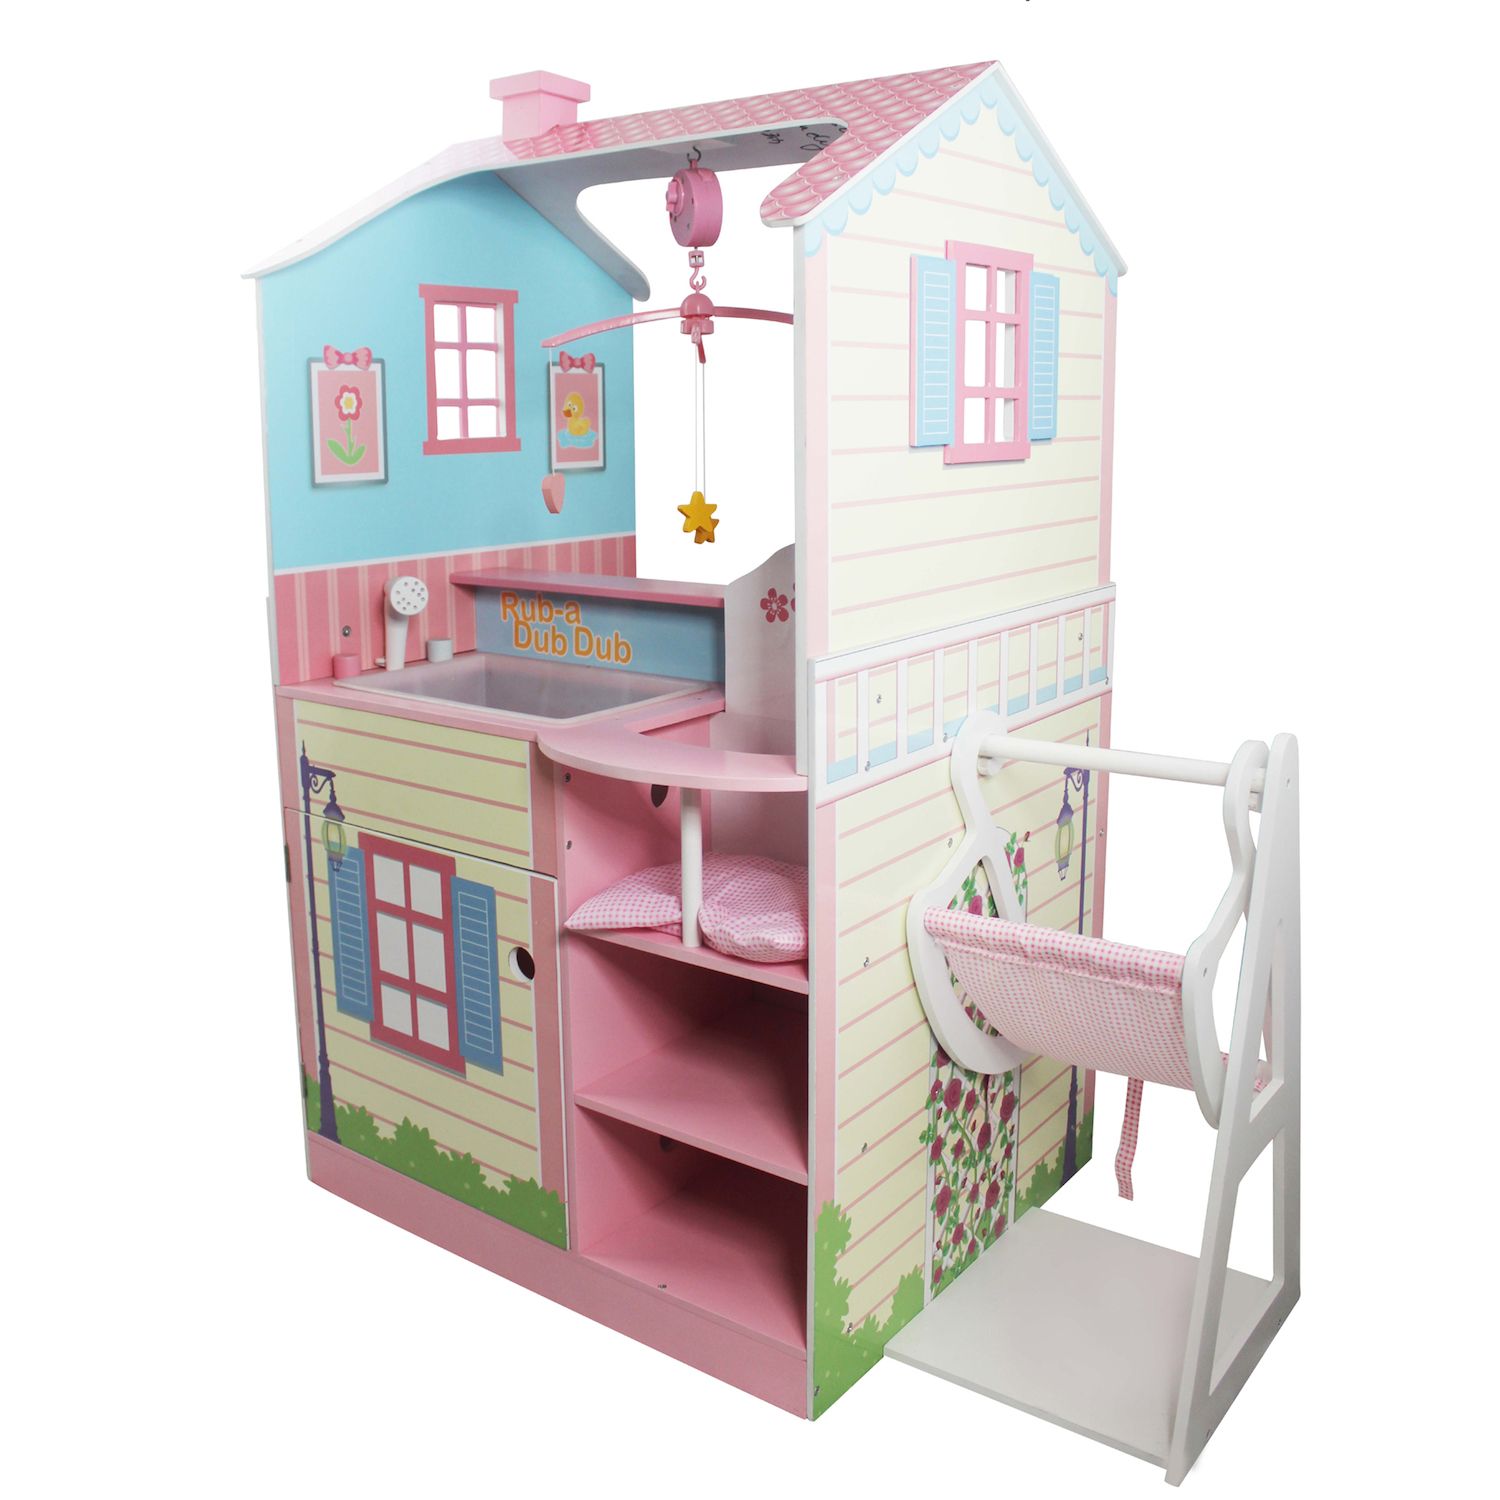 Olivia's little world - little princess 18 doll double bunk bed